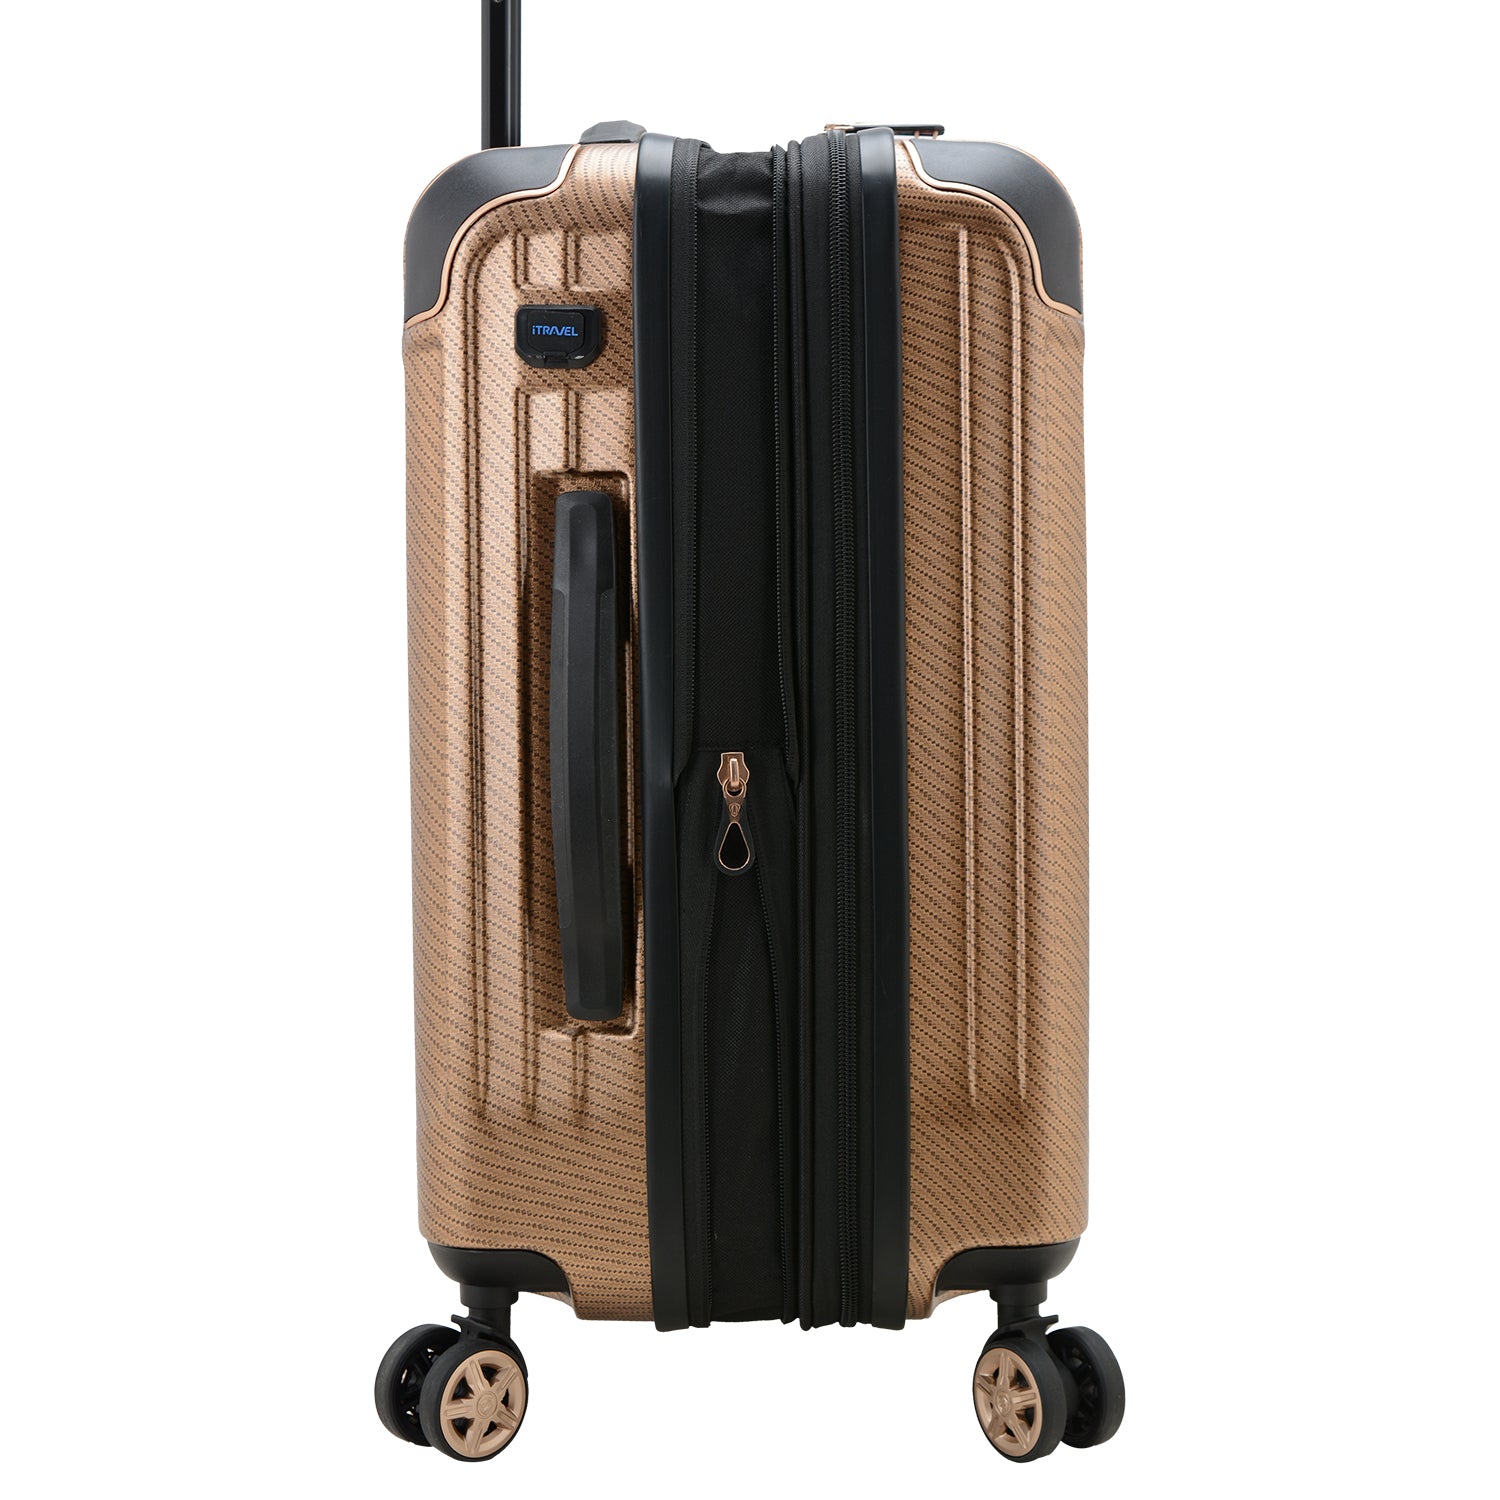 Continent Adventurer Carry On Luggage with USB Port and 4 Spinner Wheels